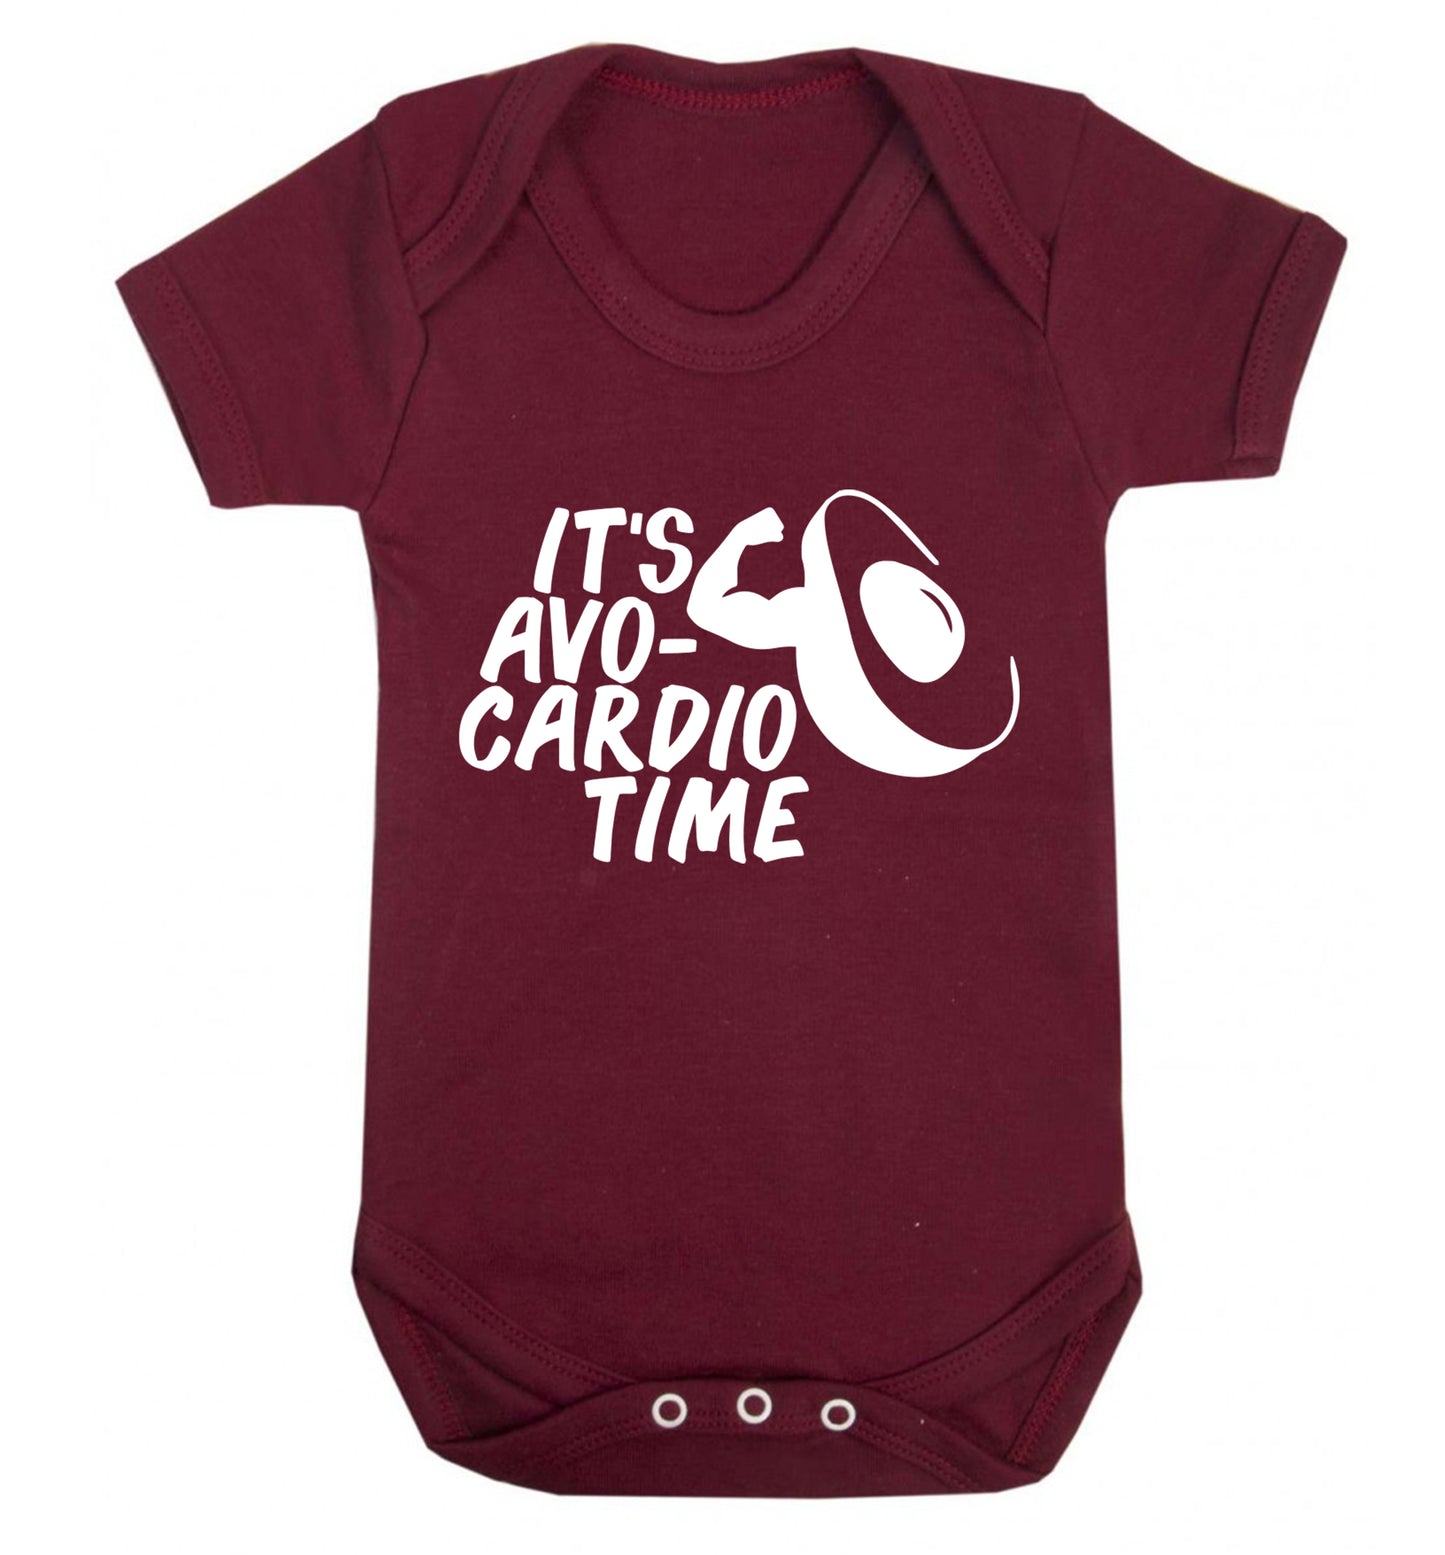 It's avo-cardio time Baby Vest maroon 18-24 months